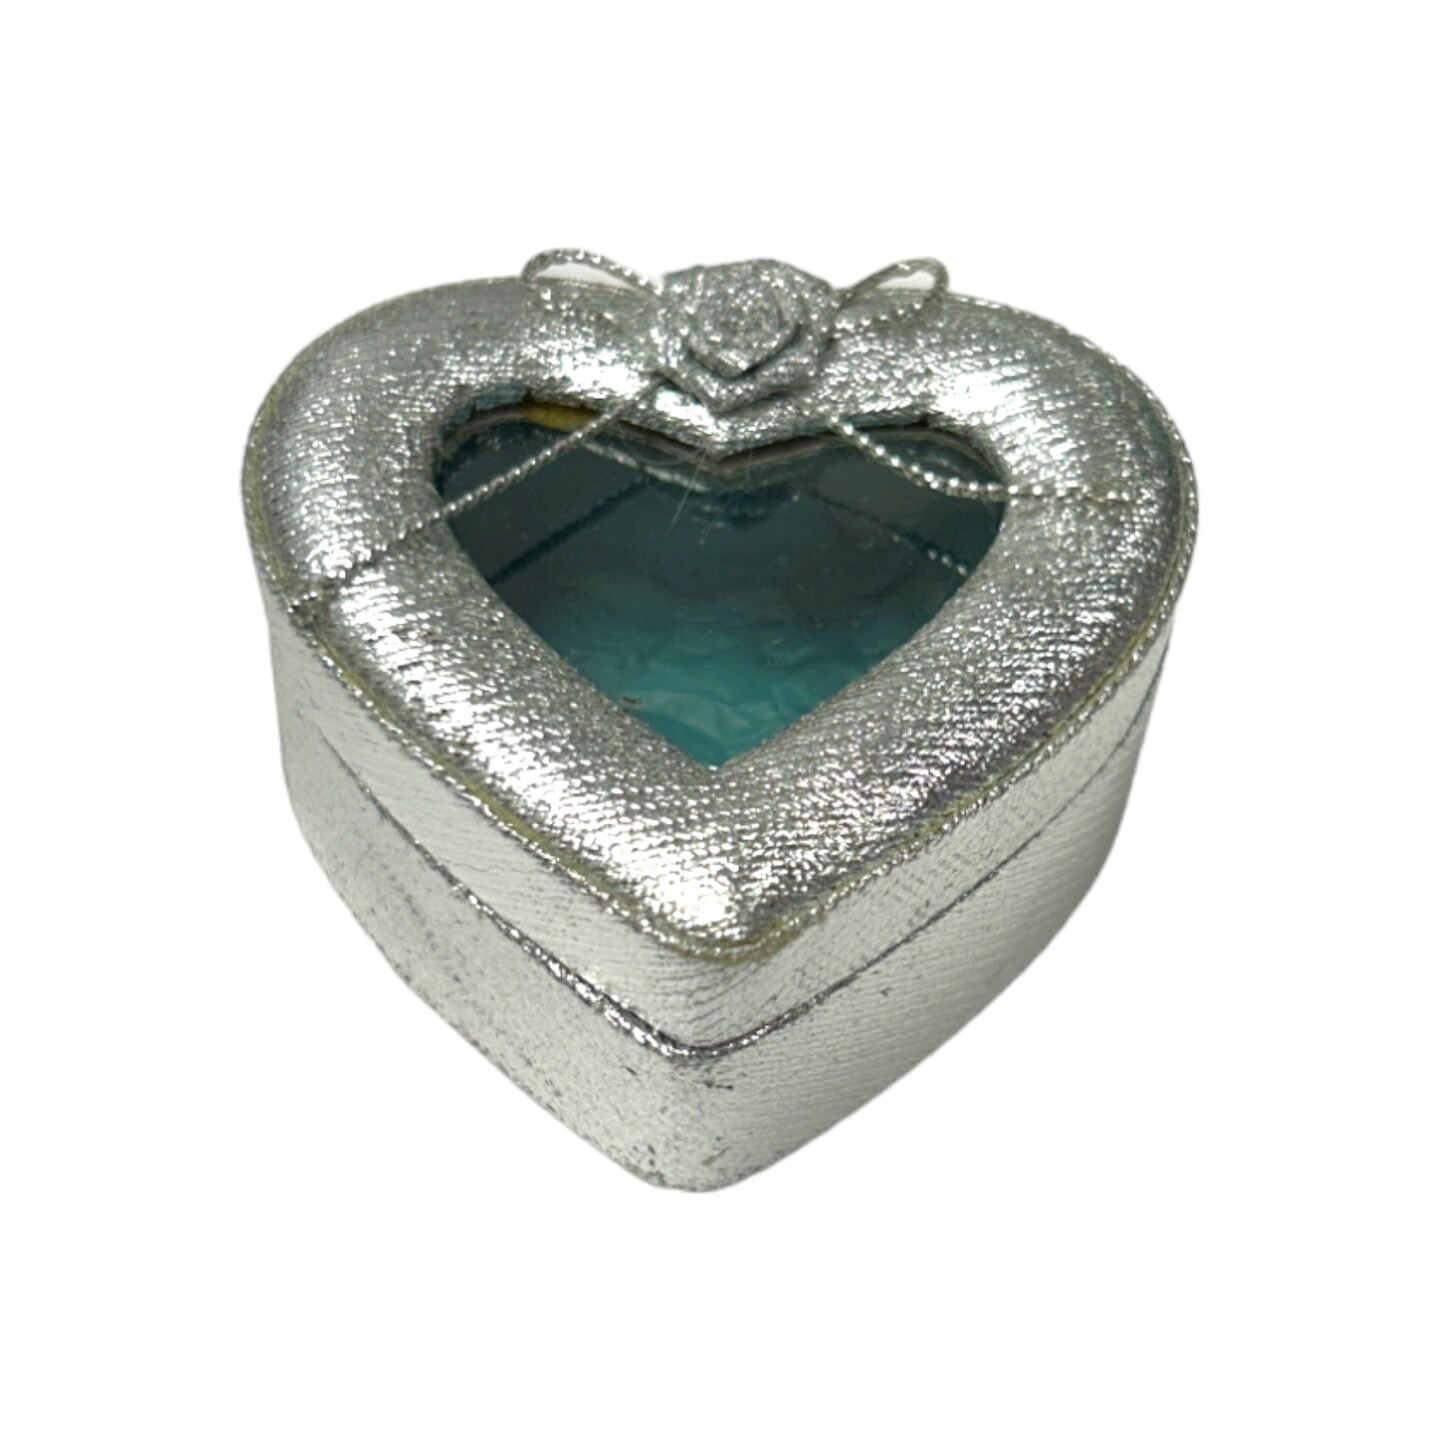 12 Pack of Heart Box with Clearview Top - Silver